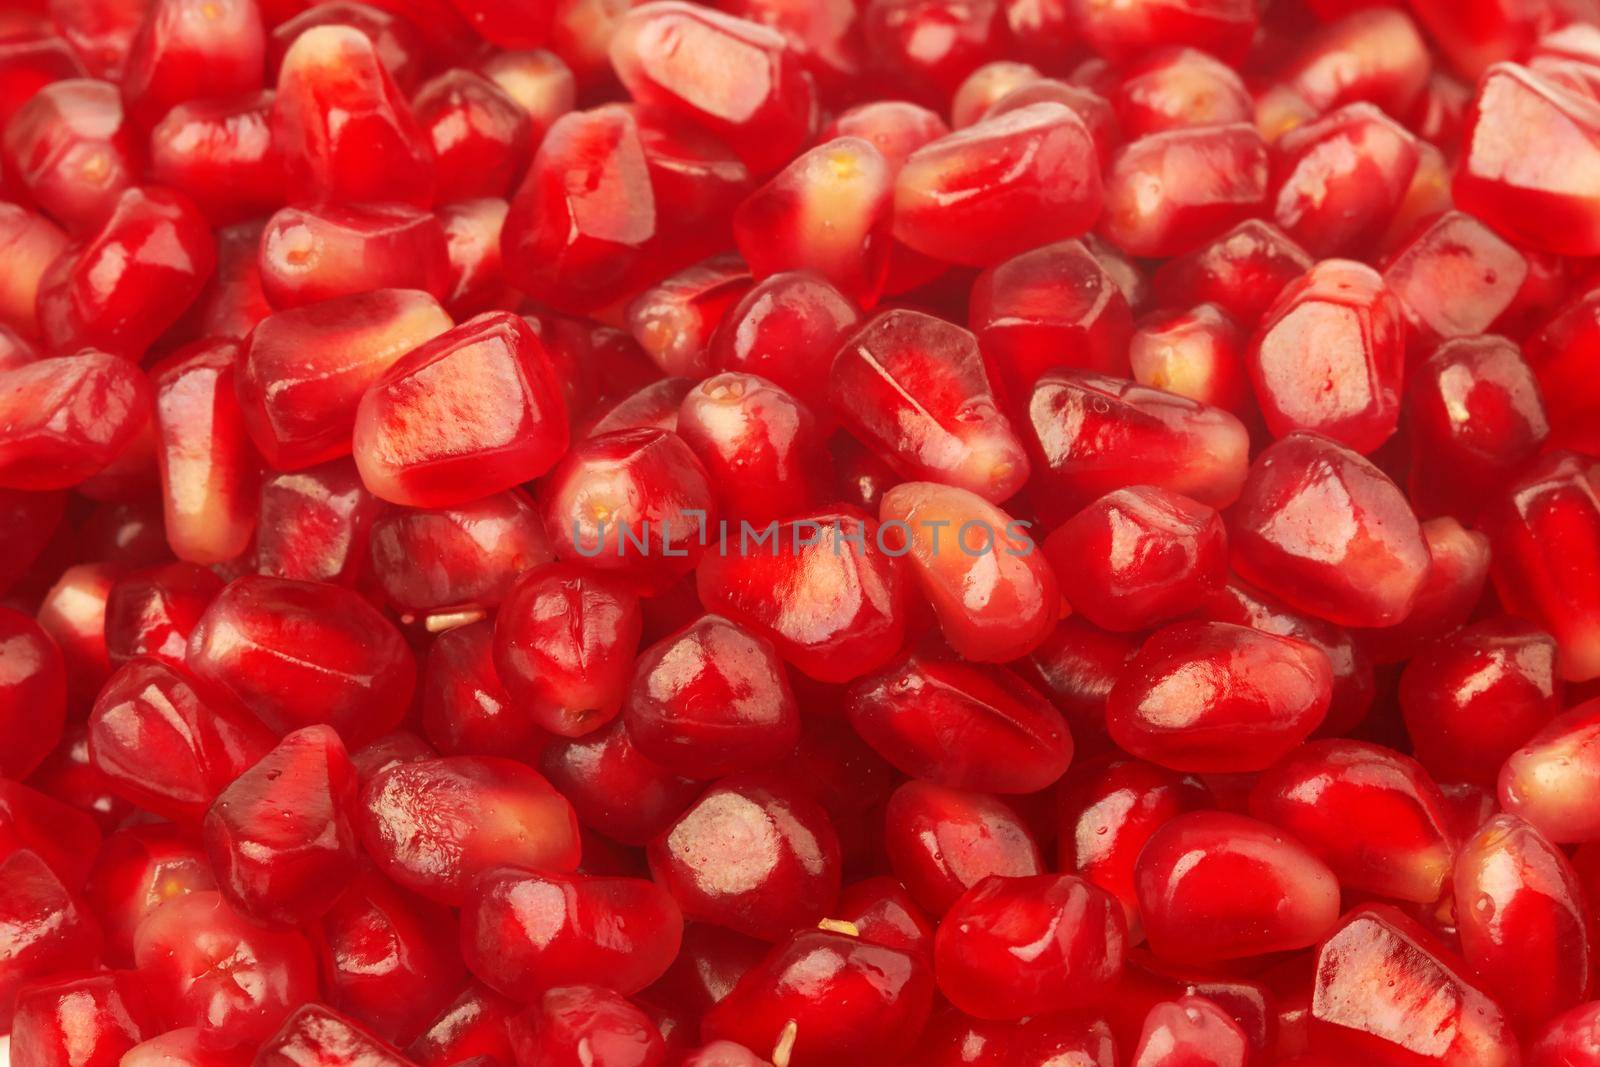 Pomegranate seeds used as a background